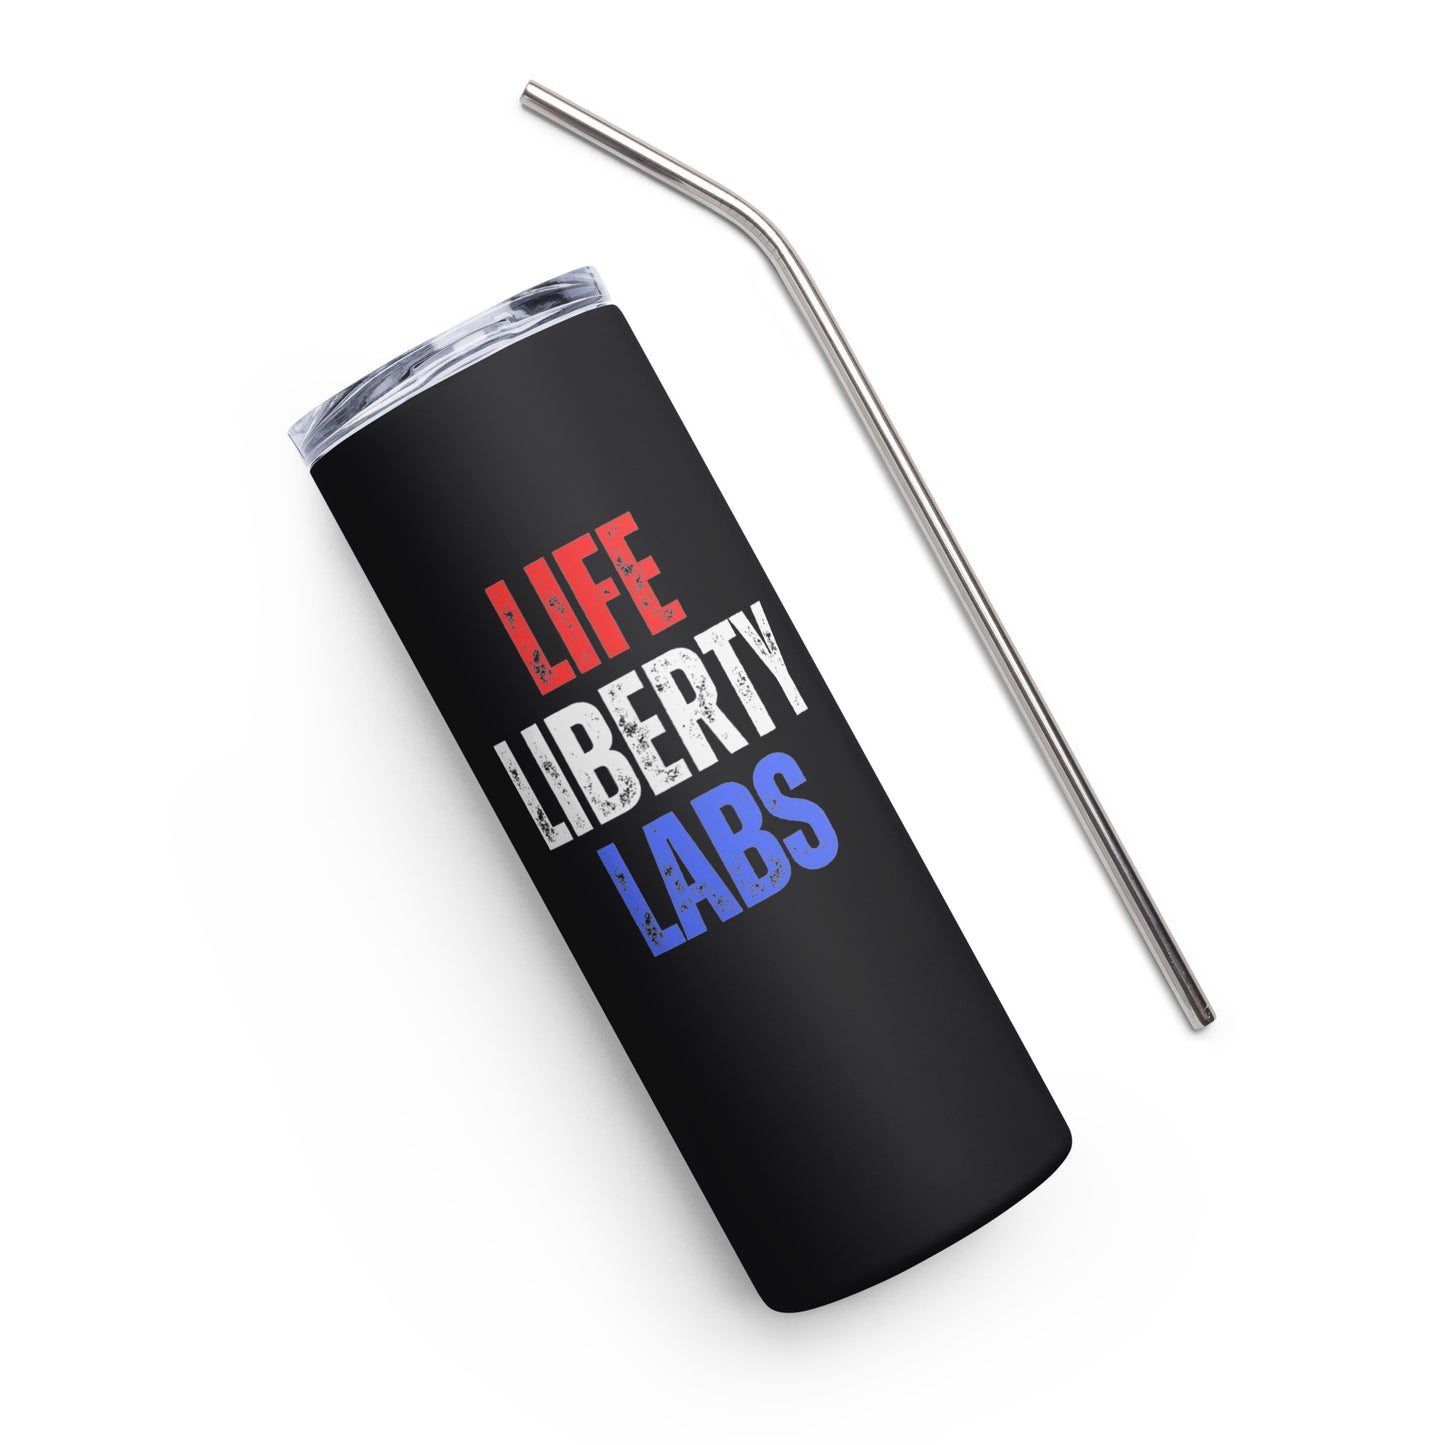 Life Liberty Labs Stainless steel tumbler